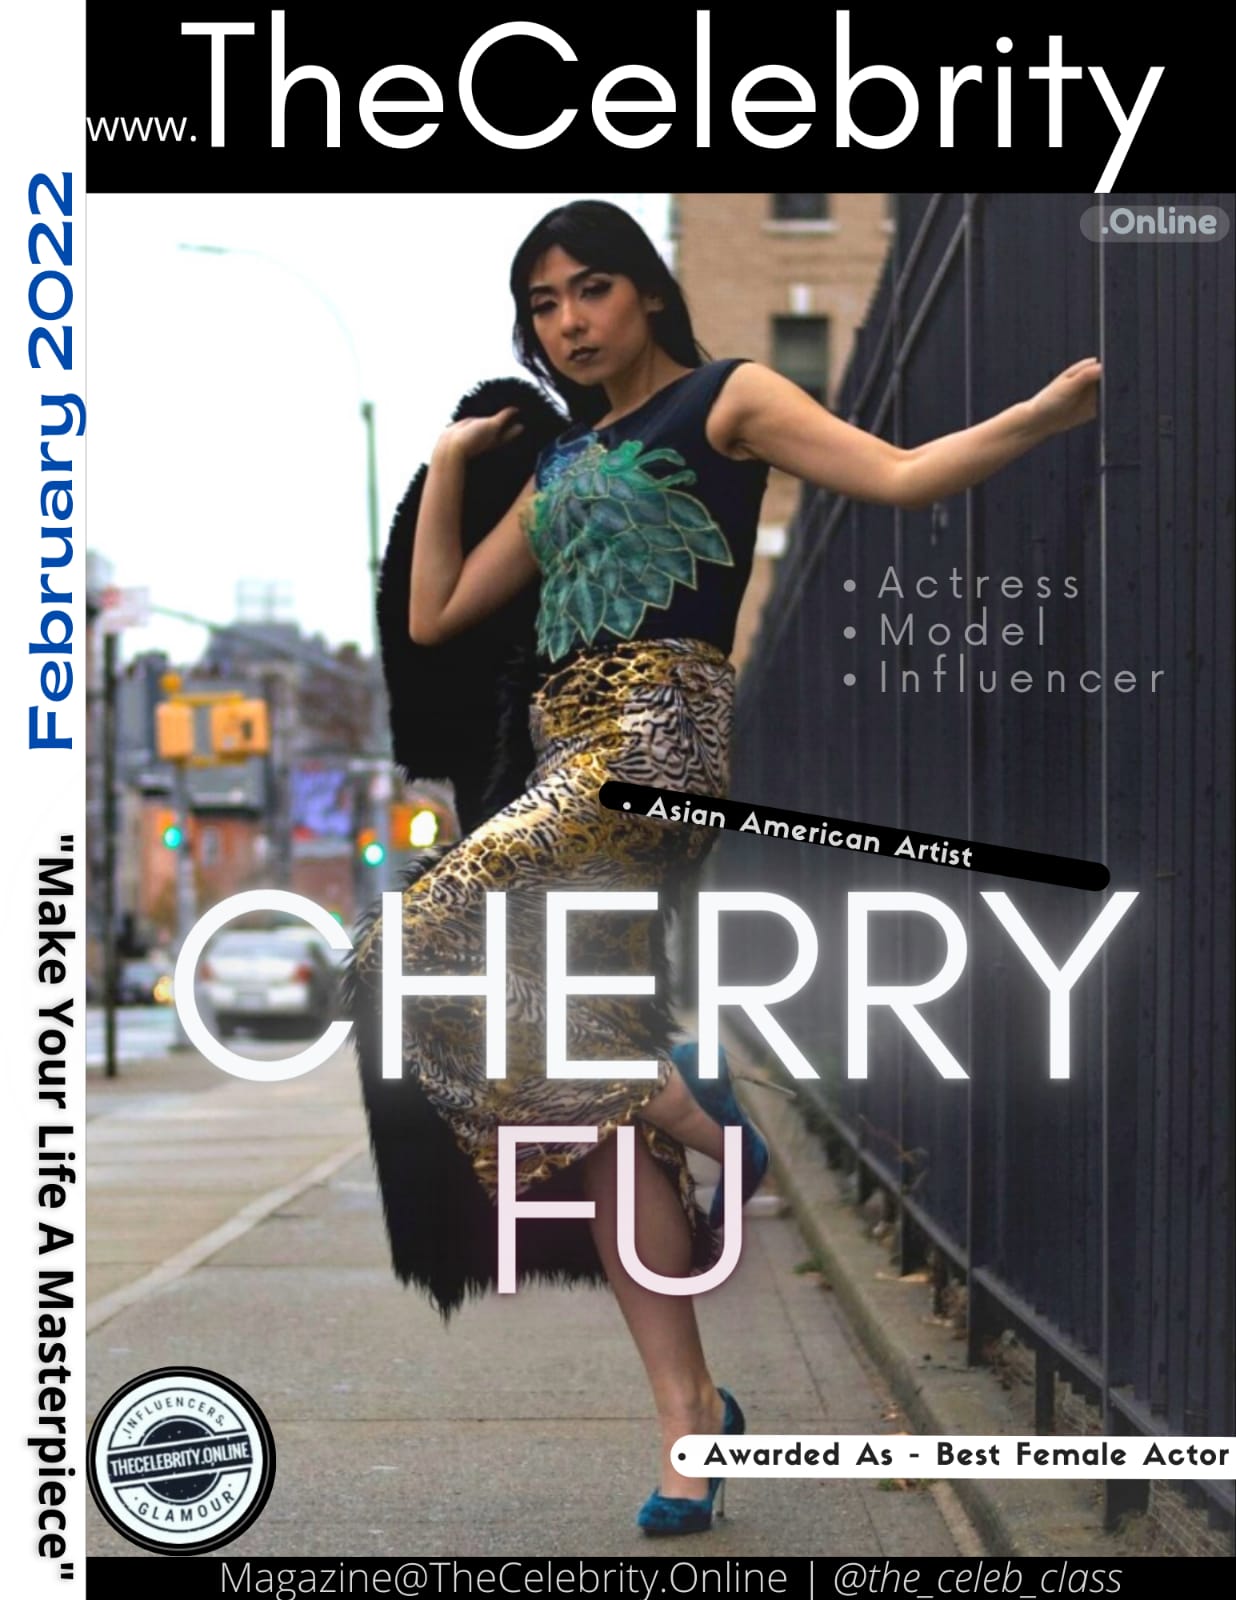 Cherry Fu – This Talented, Beautiful And Stunning Artist Is ‘Best Actress Award’ Winner